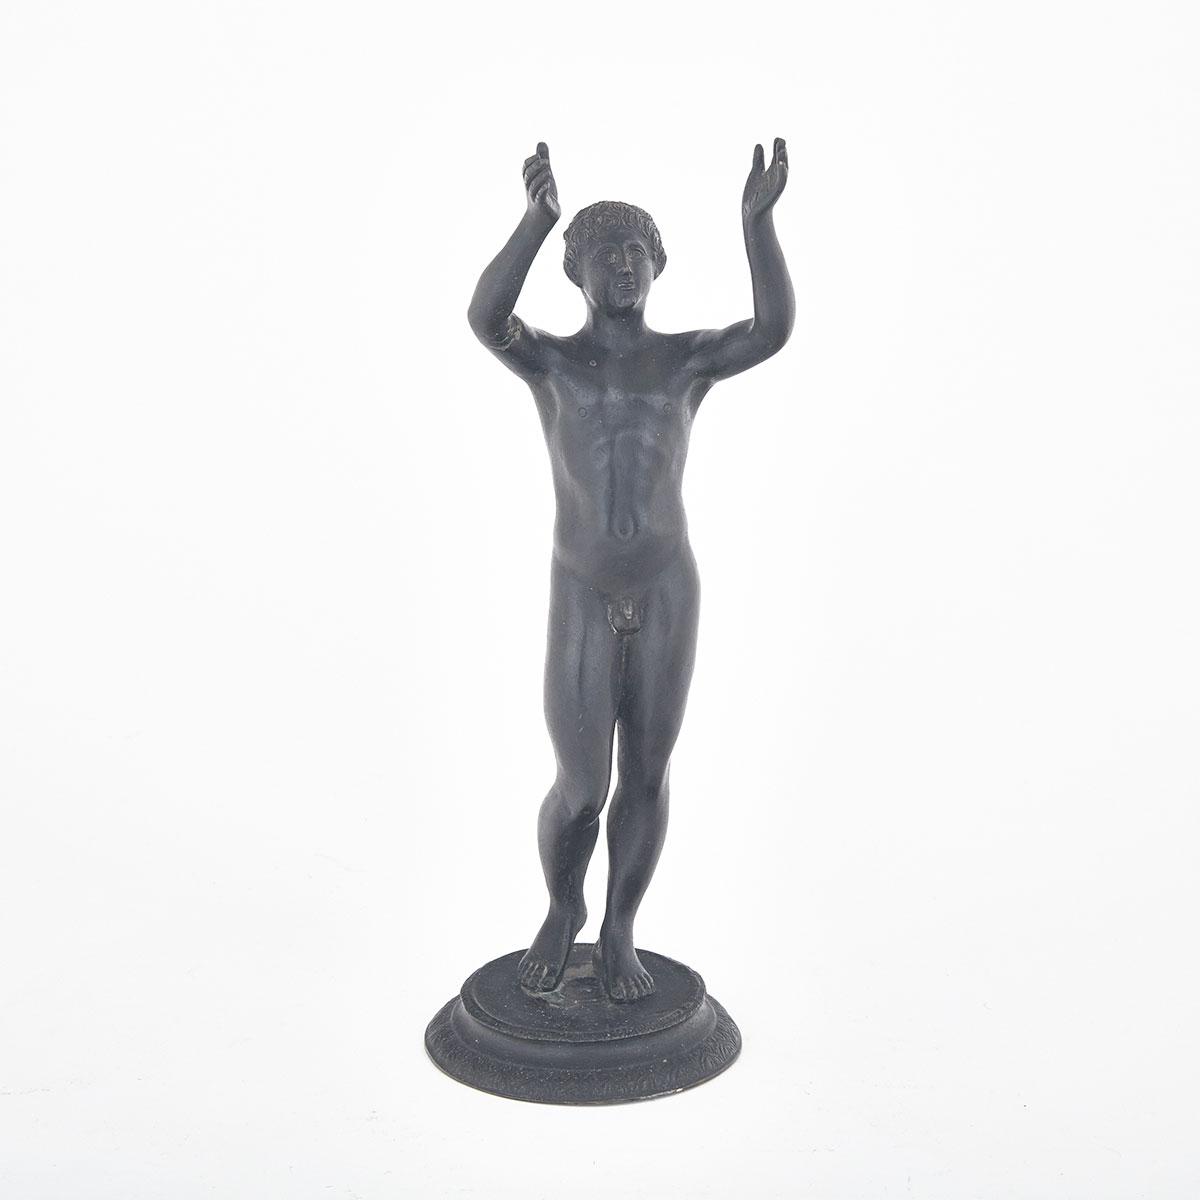 Italian ‘Grand Tour’ Patinated Bronze Figure of The Praying Boy, After the Antique, mid 19th century